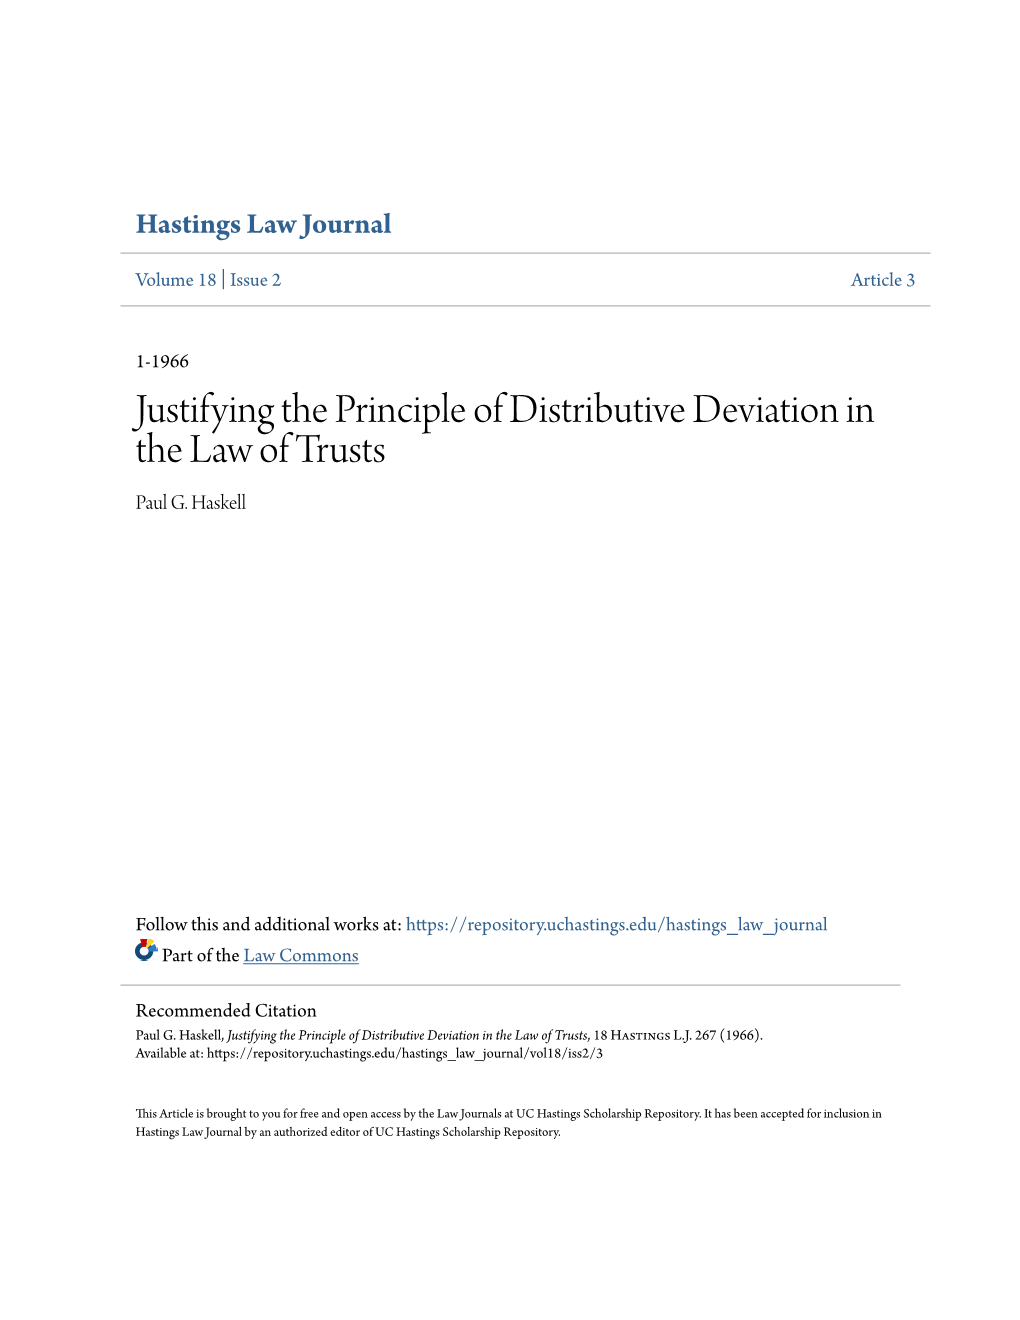 Justifying the Principle of Distributive Deviation in the Law of Trusts Paul G